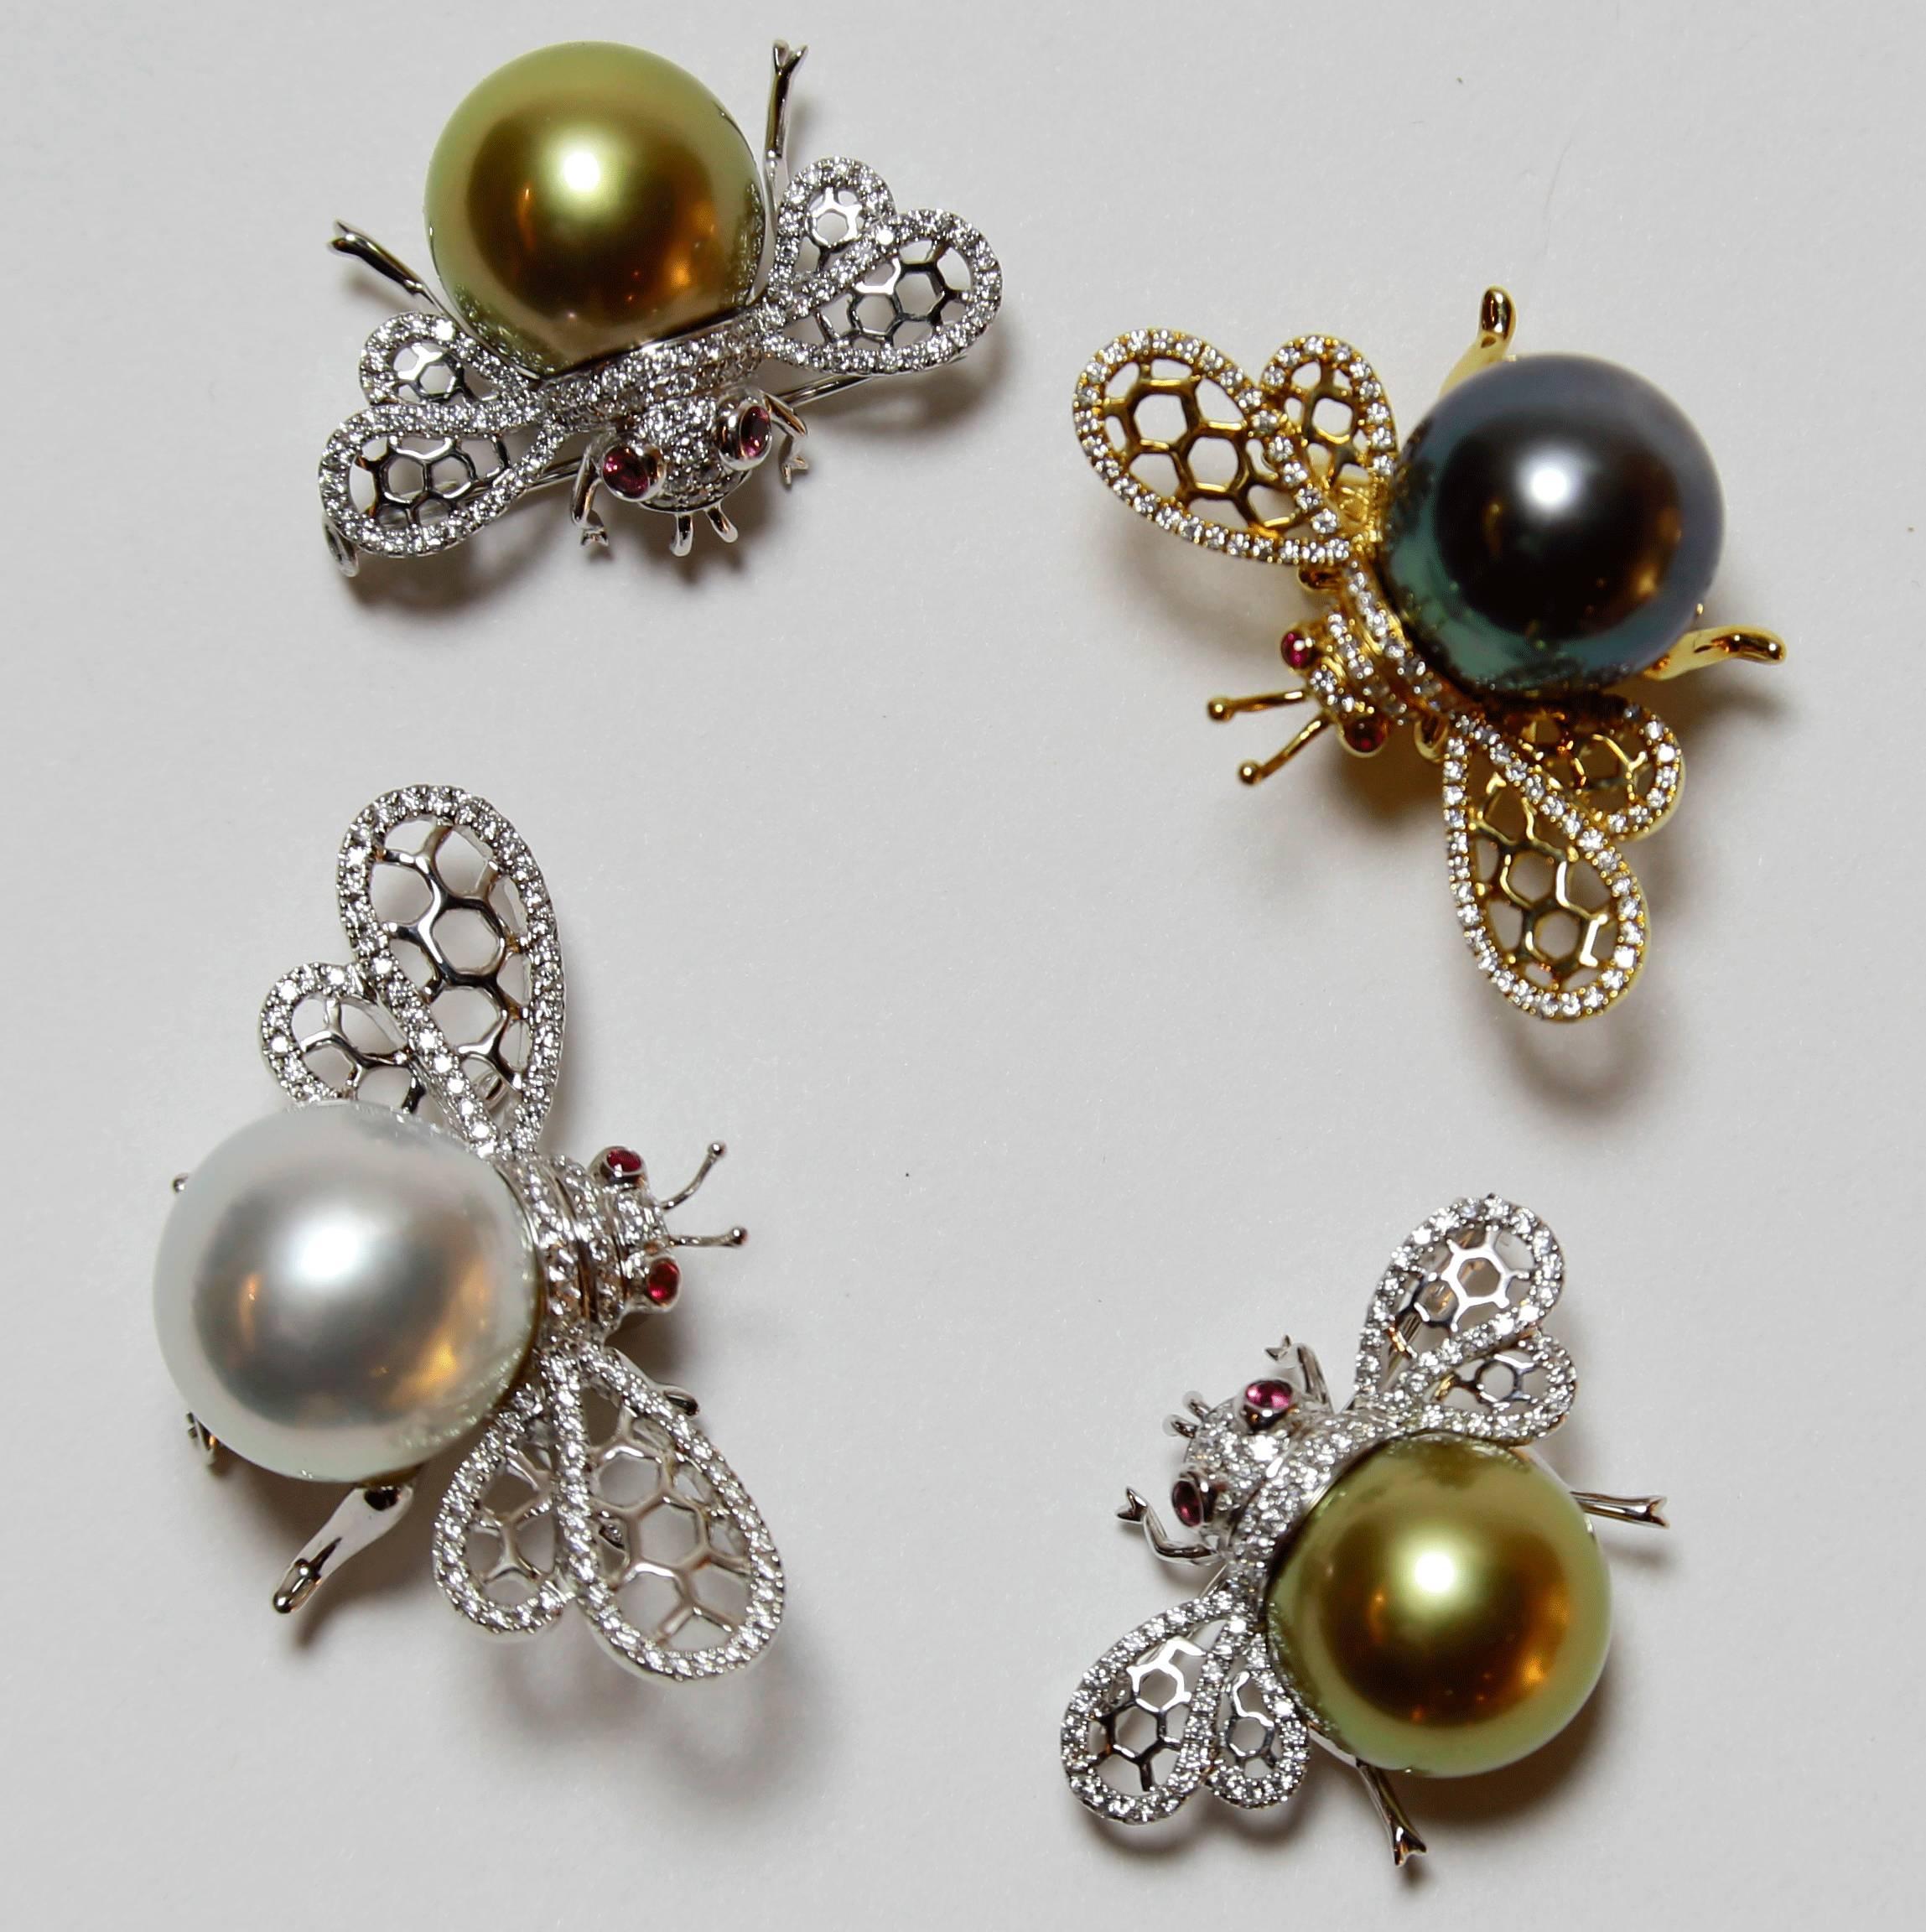 Beautiful Bumble Bee pin, set with approximately 0.50ctw in G/VS diamonds, enhancing the wings and body, a 15mm White South Sea Pearl and two Ruby eyes; 18k white gold; pin measures approx. 40.5mm x 24.25mm and weighs approx. 14.20gm. A Classic and